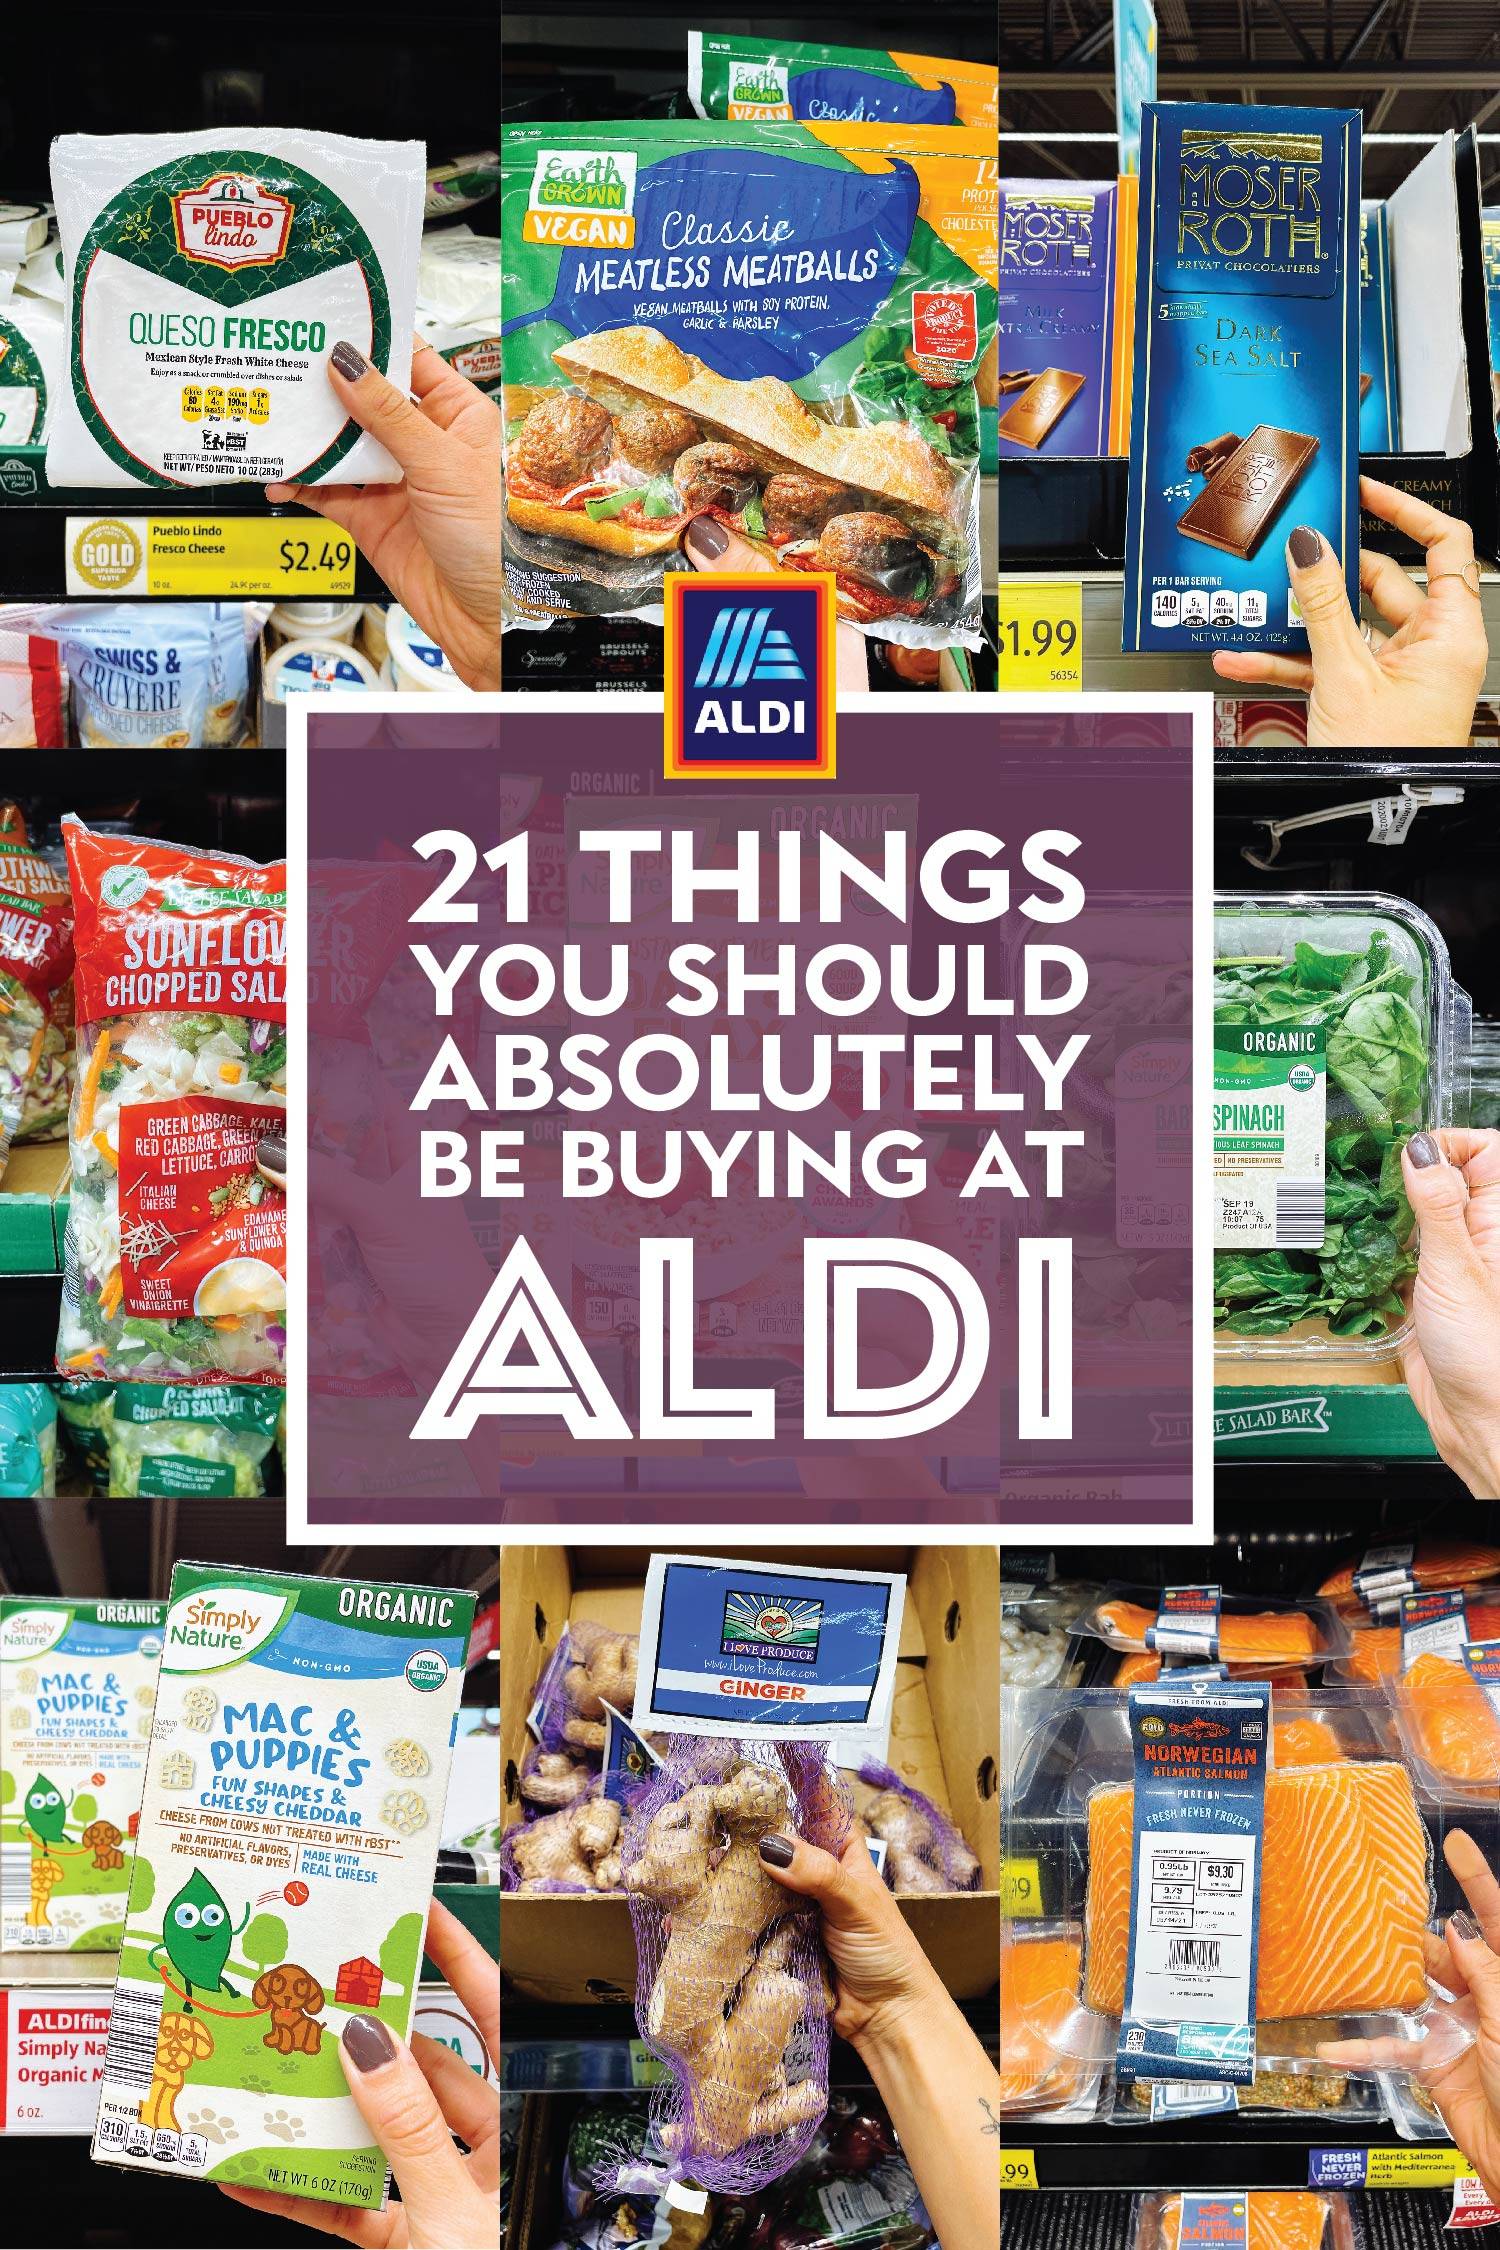 Collage of our favorite products at Aldi.